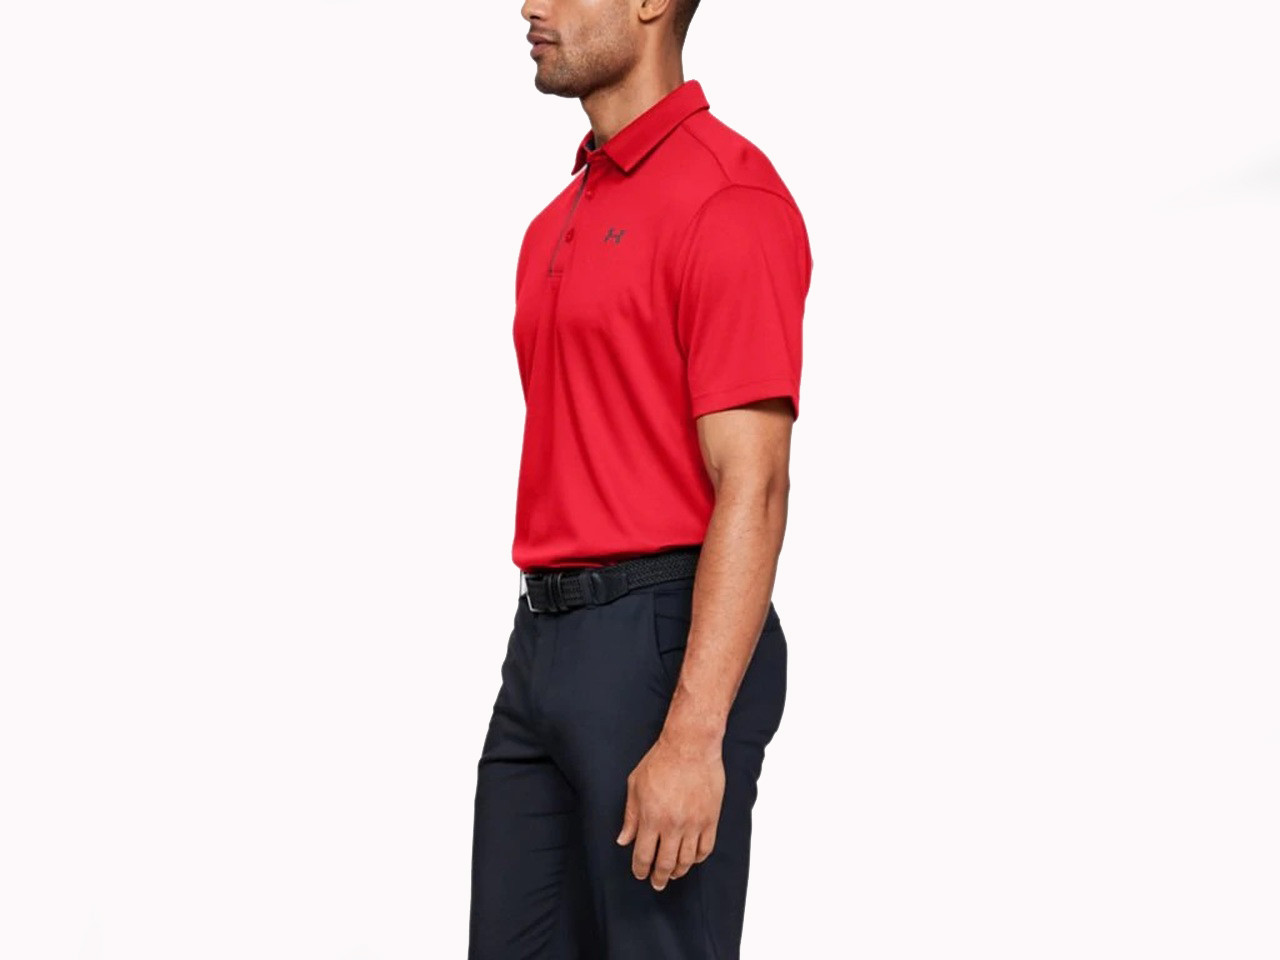 RED TECH POLO 1290140-600 UNDER ARMOUR